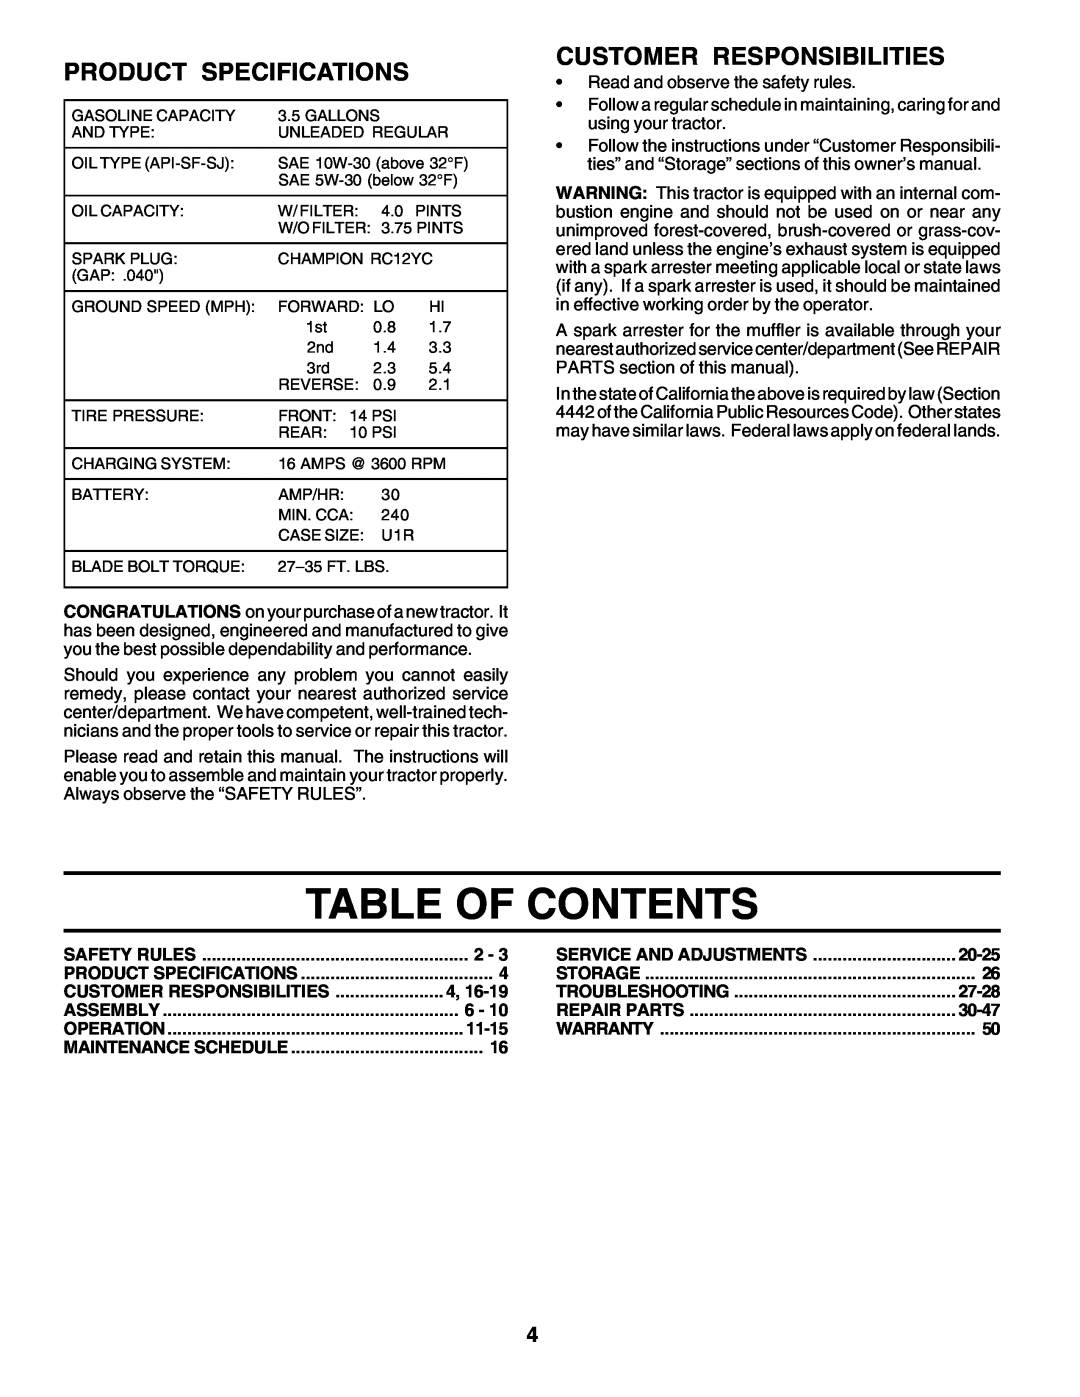 Poulan 177271 owner manual Table Of Contents, Product Specifications, Customer Responsibilities 